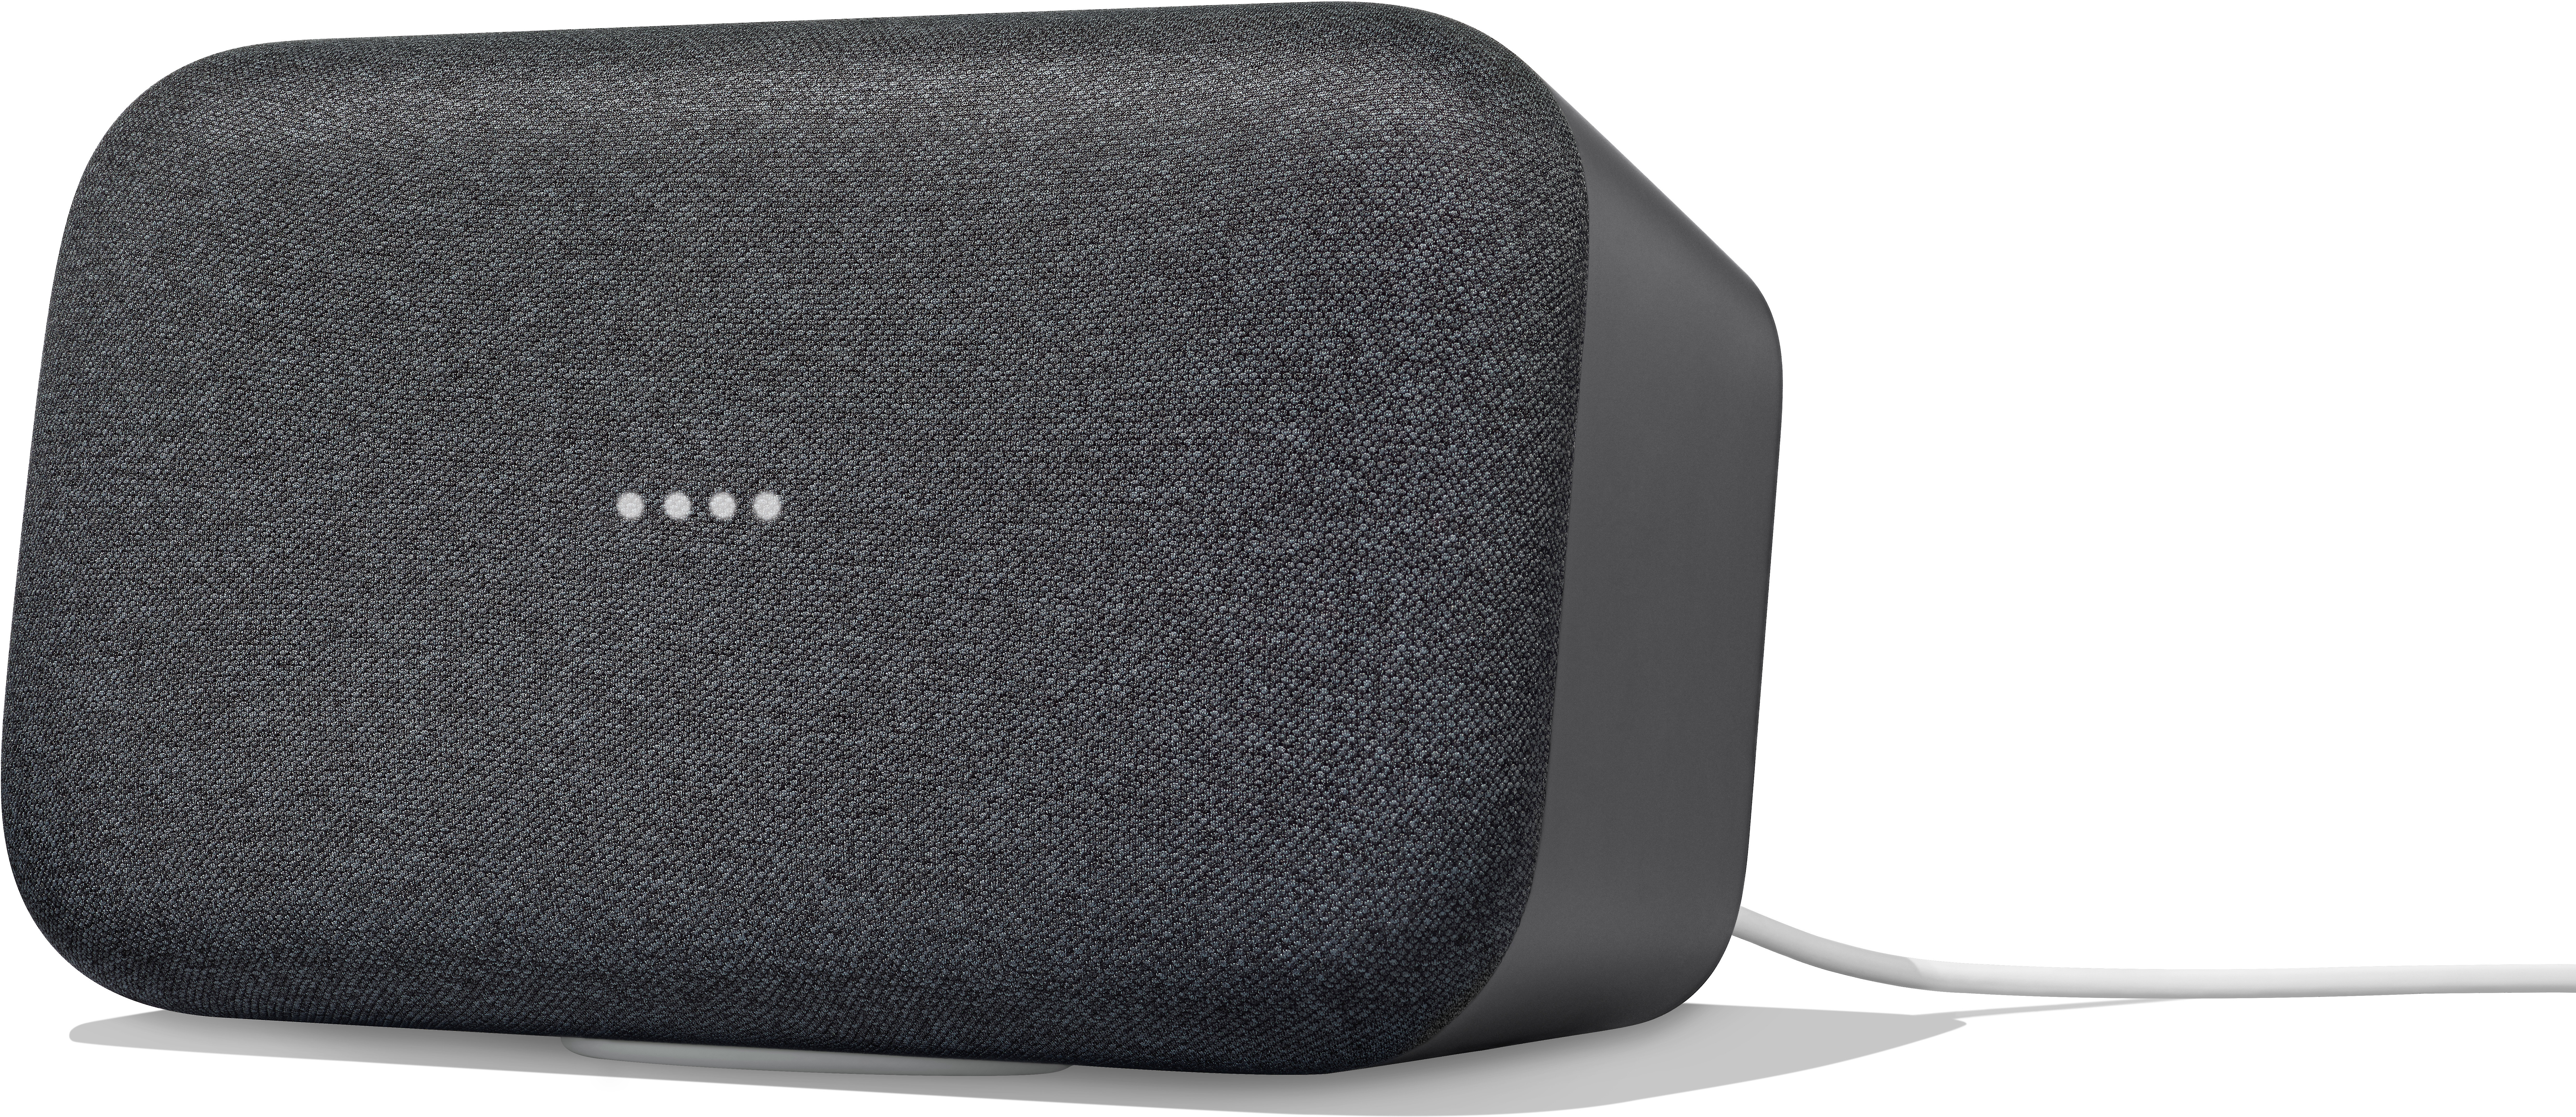 google home max as computer speaker